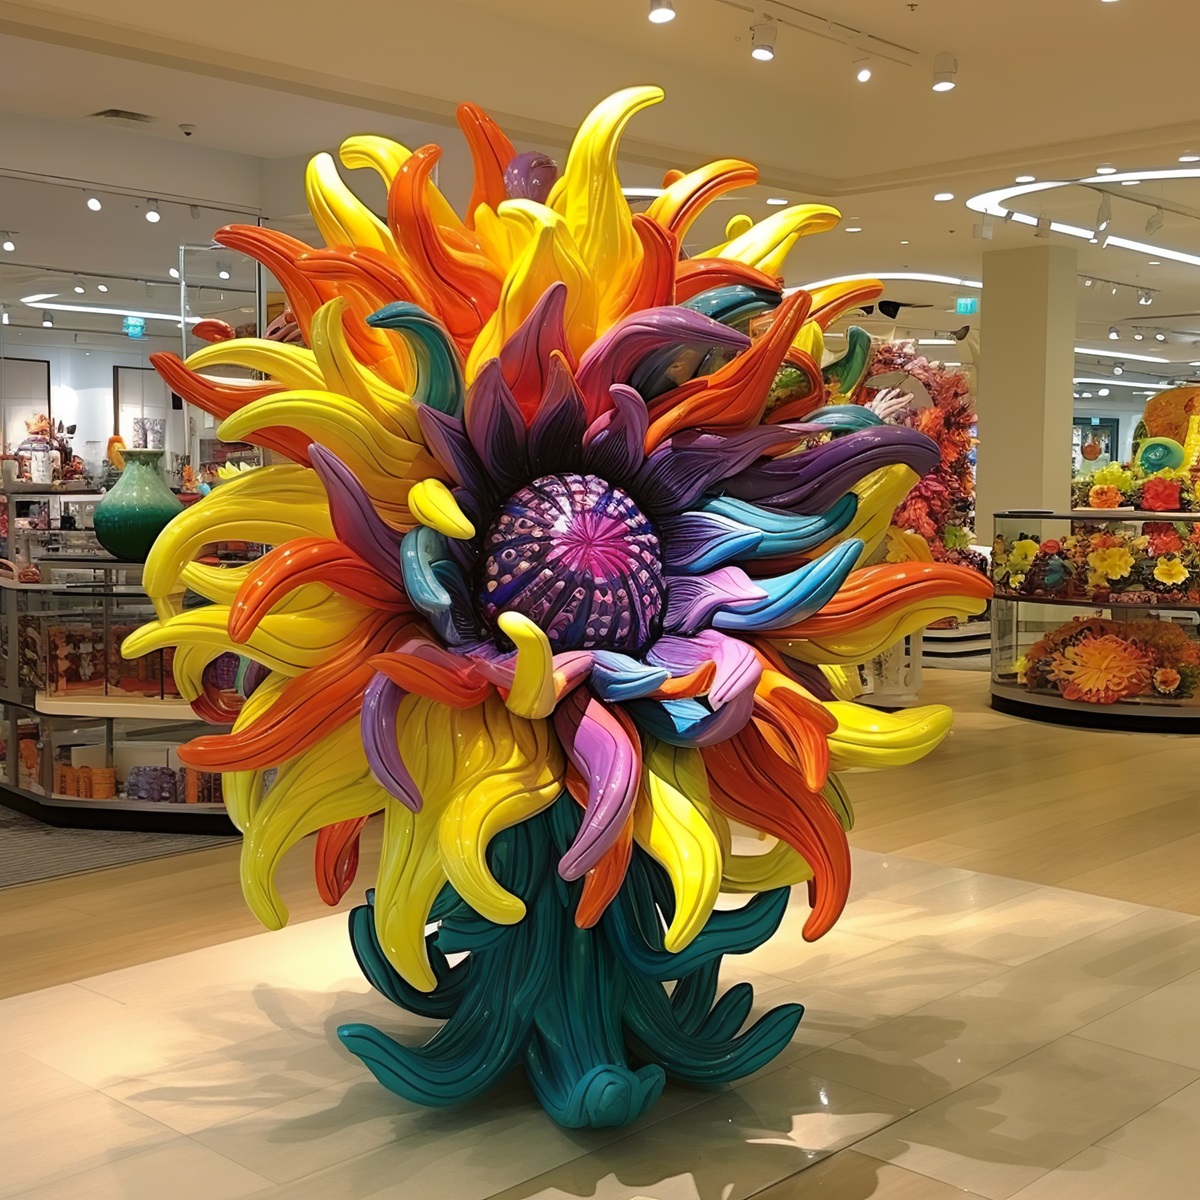 Giant Flower Props 3D Printed